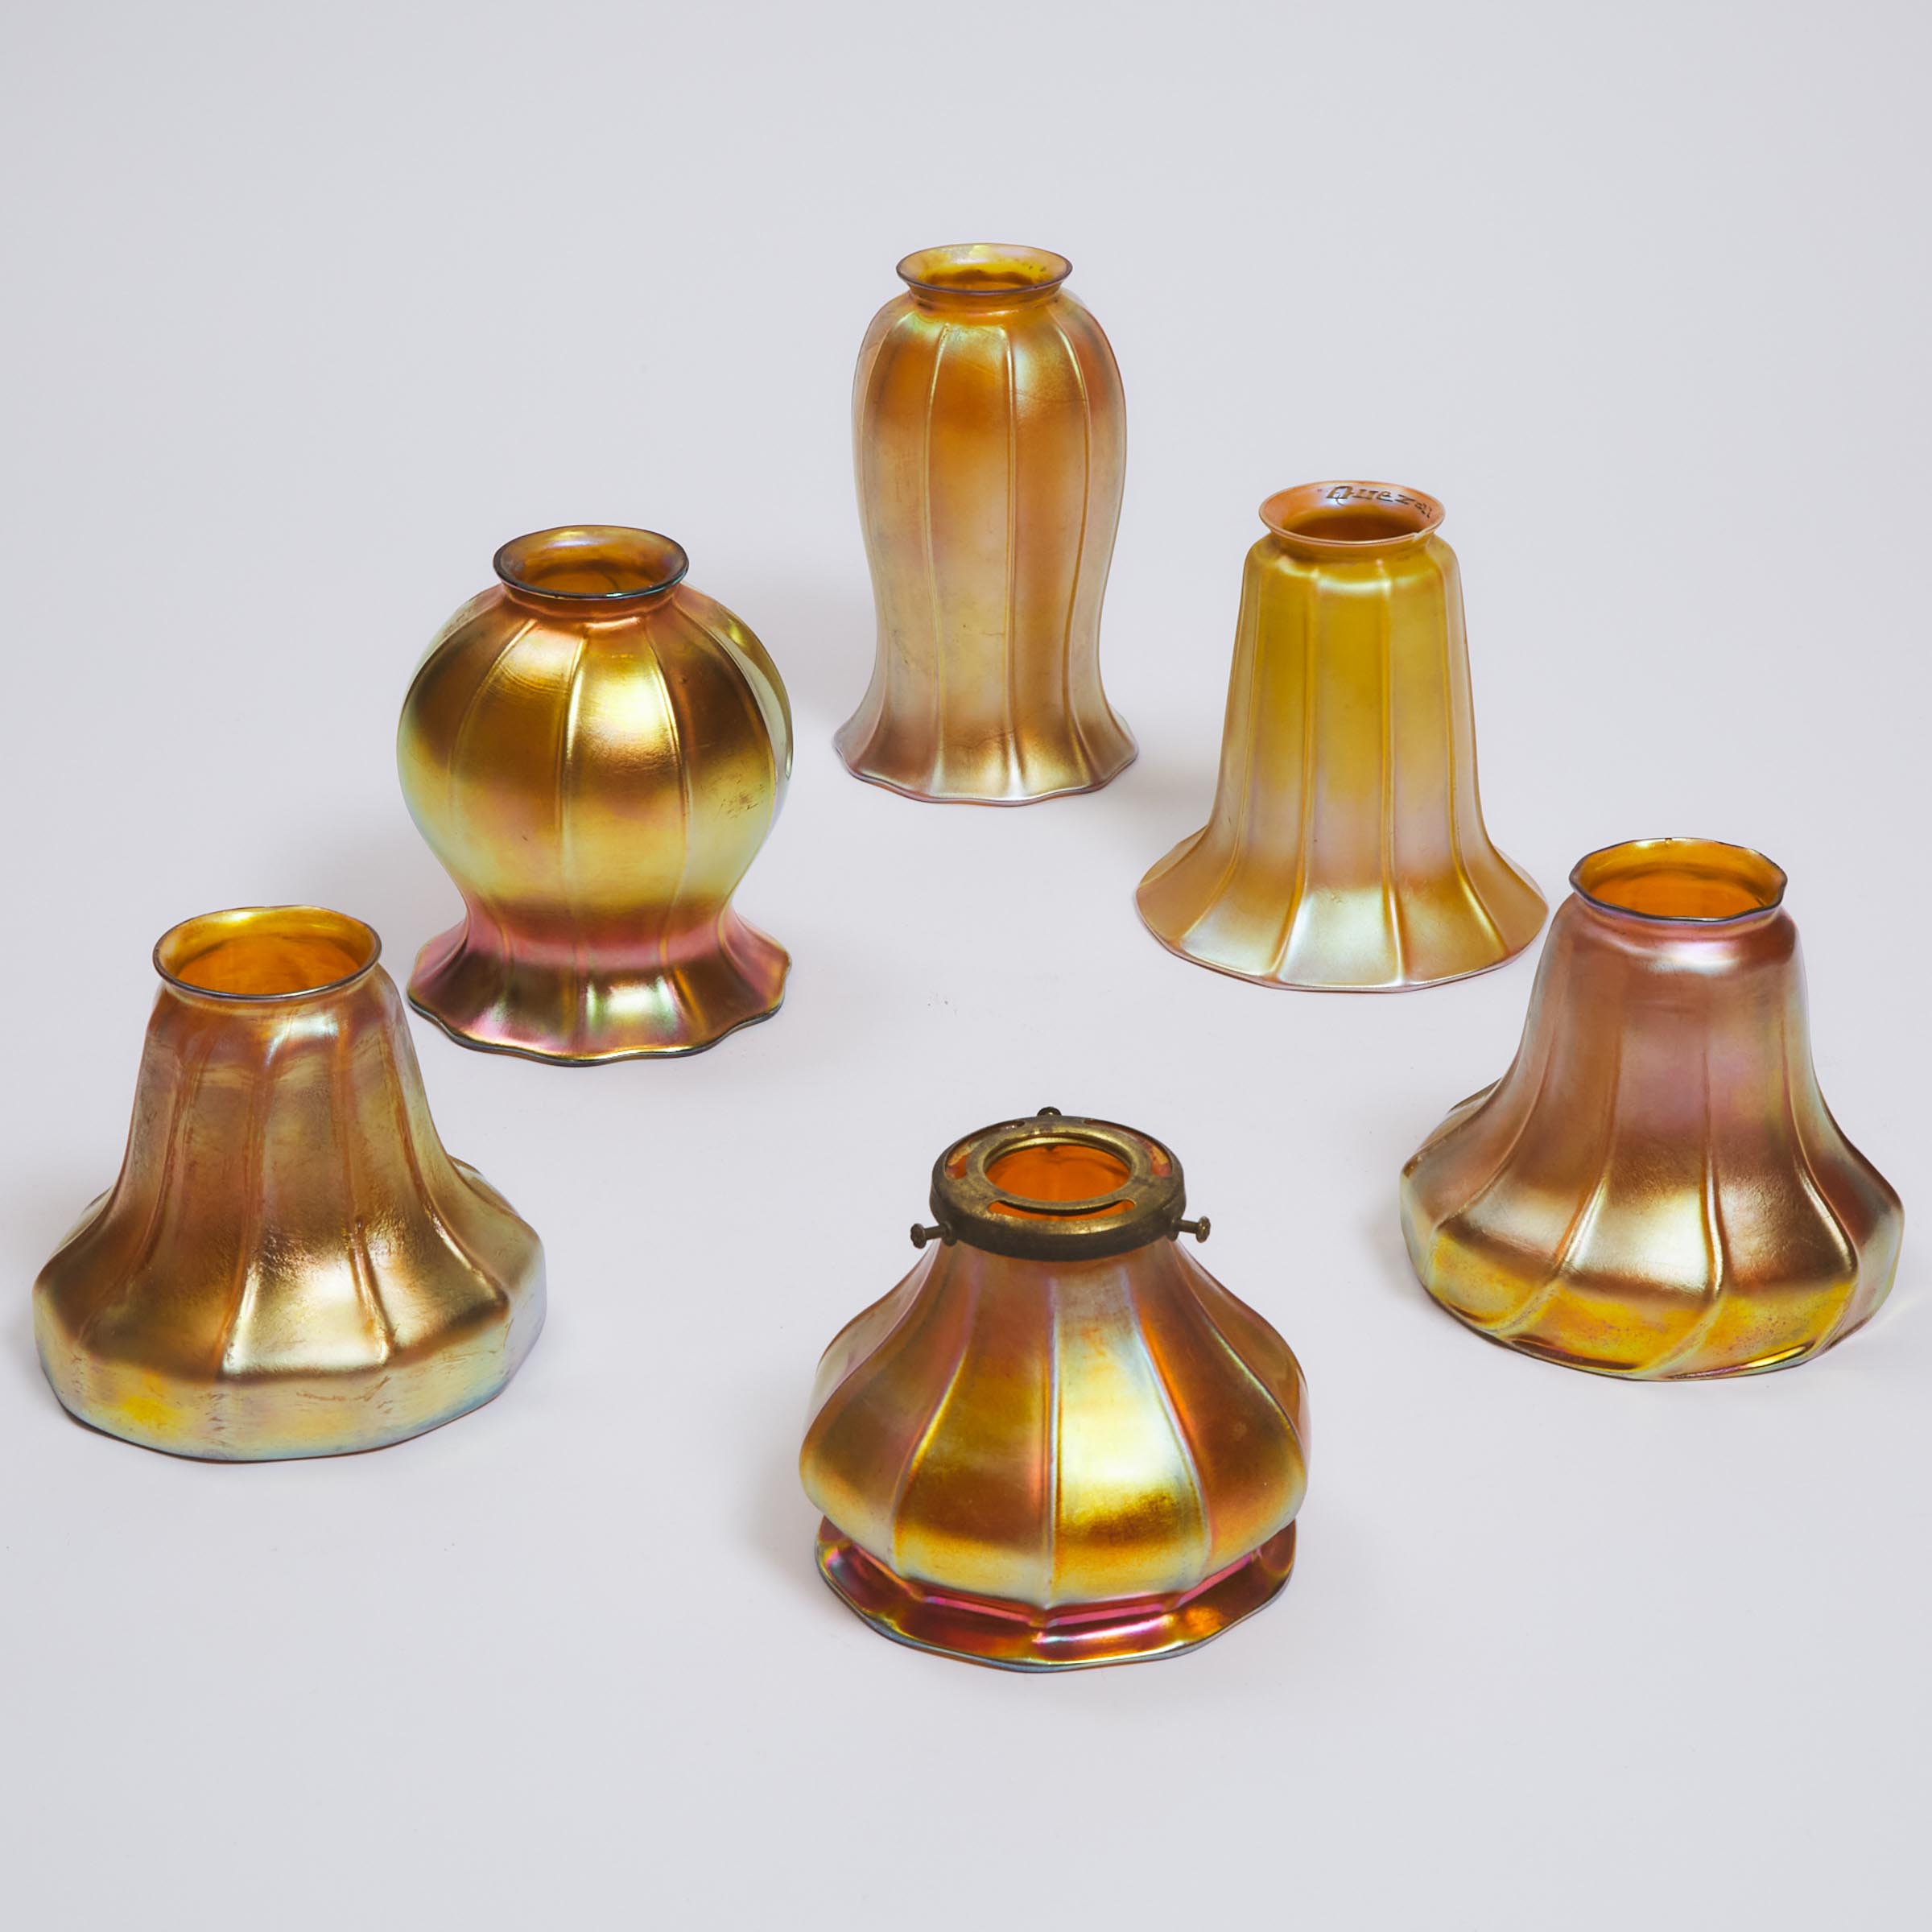 Six Various Steuben, Quezal, and Other American Iridescent Glass Shades, early 20th century